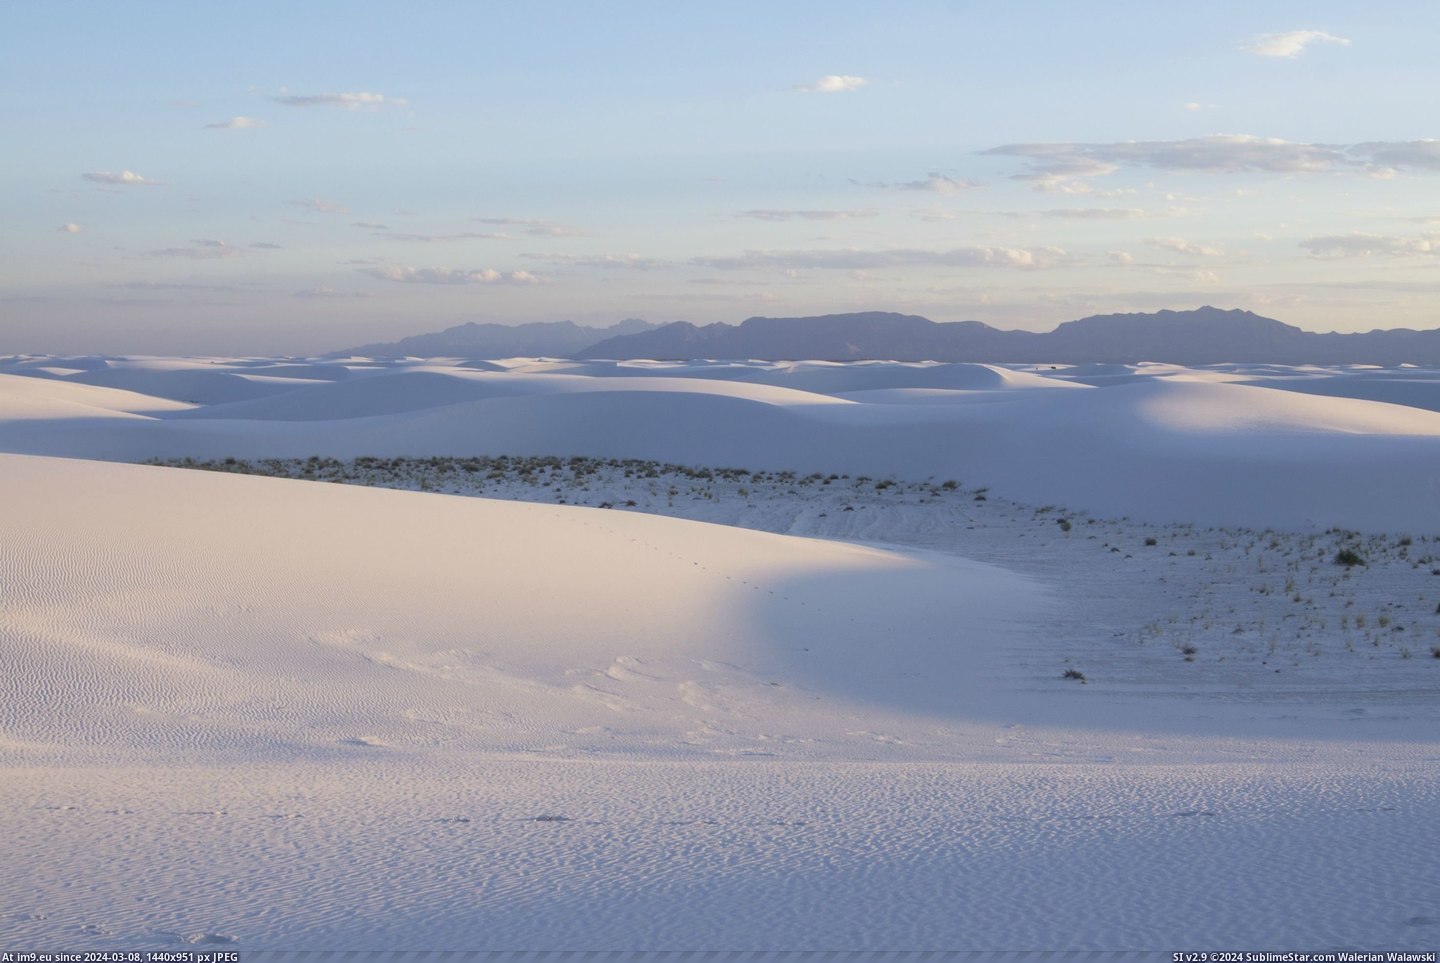 #White #National #Breathtaking #Sands #4912x3264 #Sunset #Monument [Earthporn] White Sands National Monument is breathtaking just before sunset (OC) [4912x3264] Pic. (Изображение из альбом My r/EARTHPORN favs))